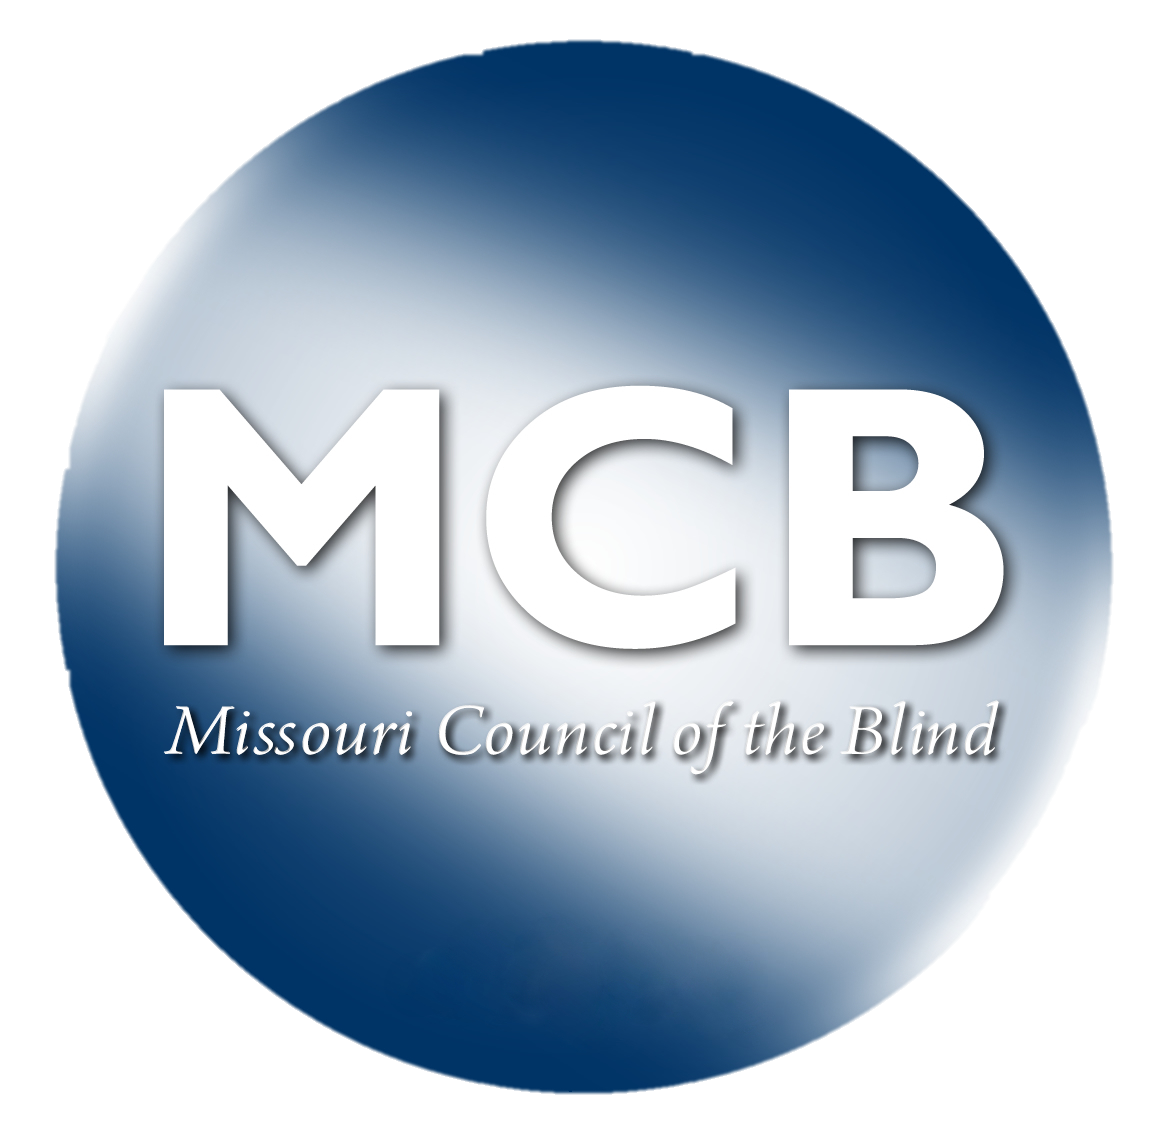 Missouri Council of the Blind